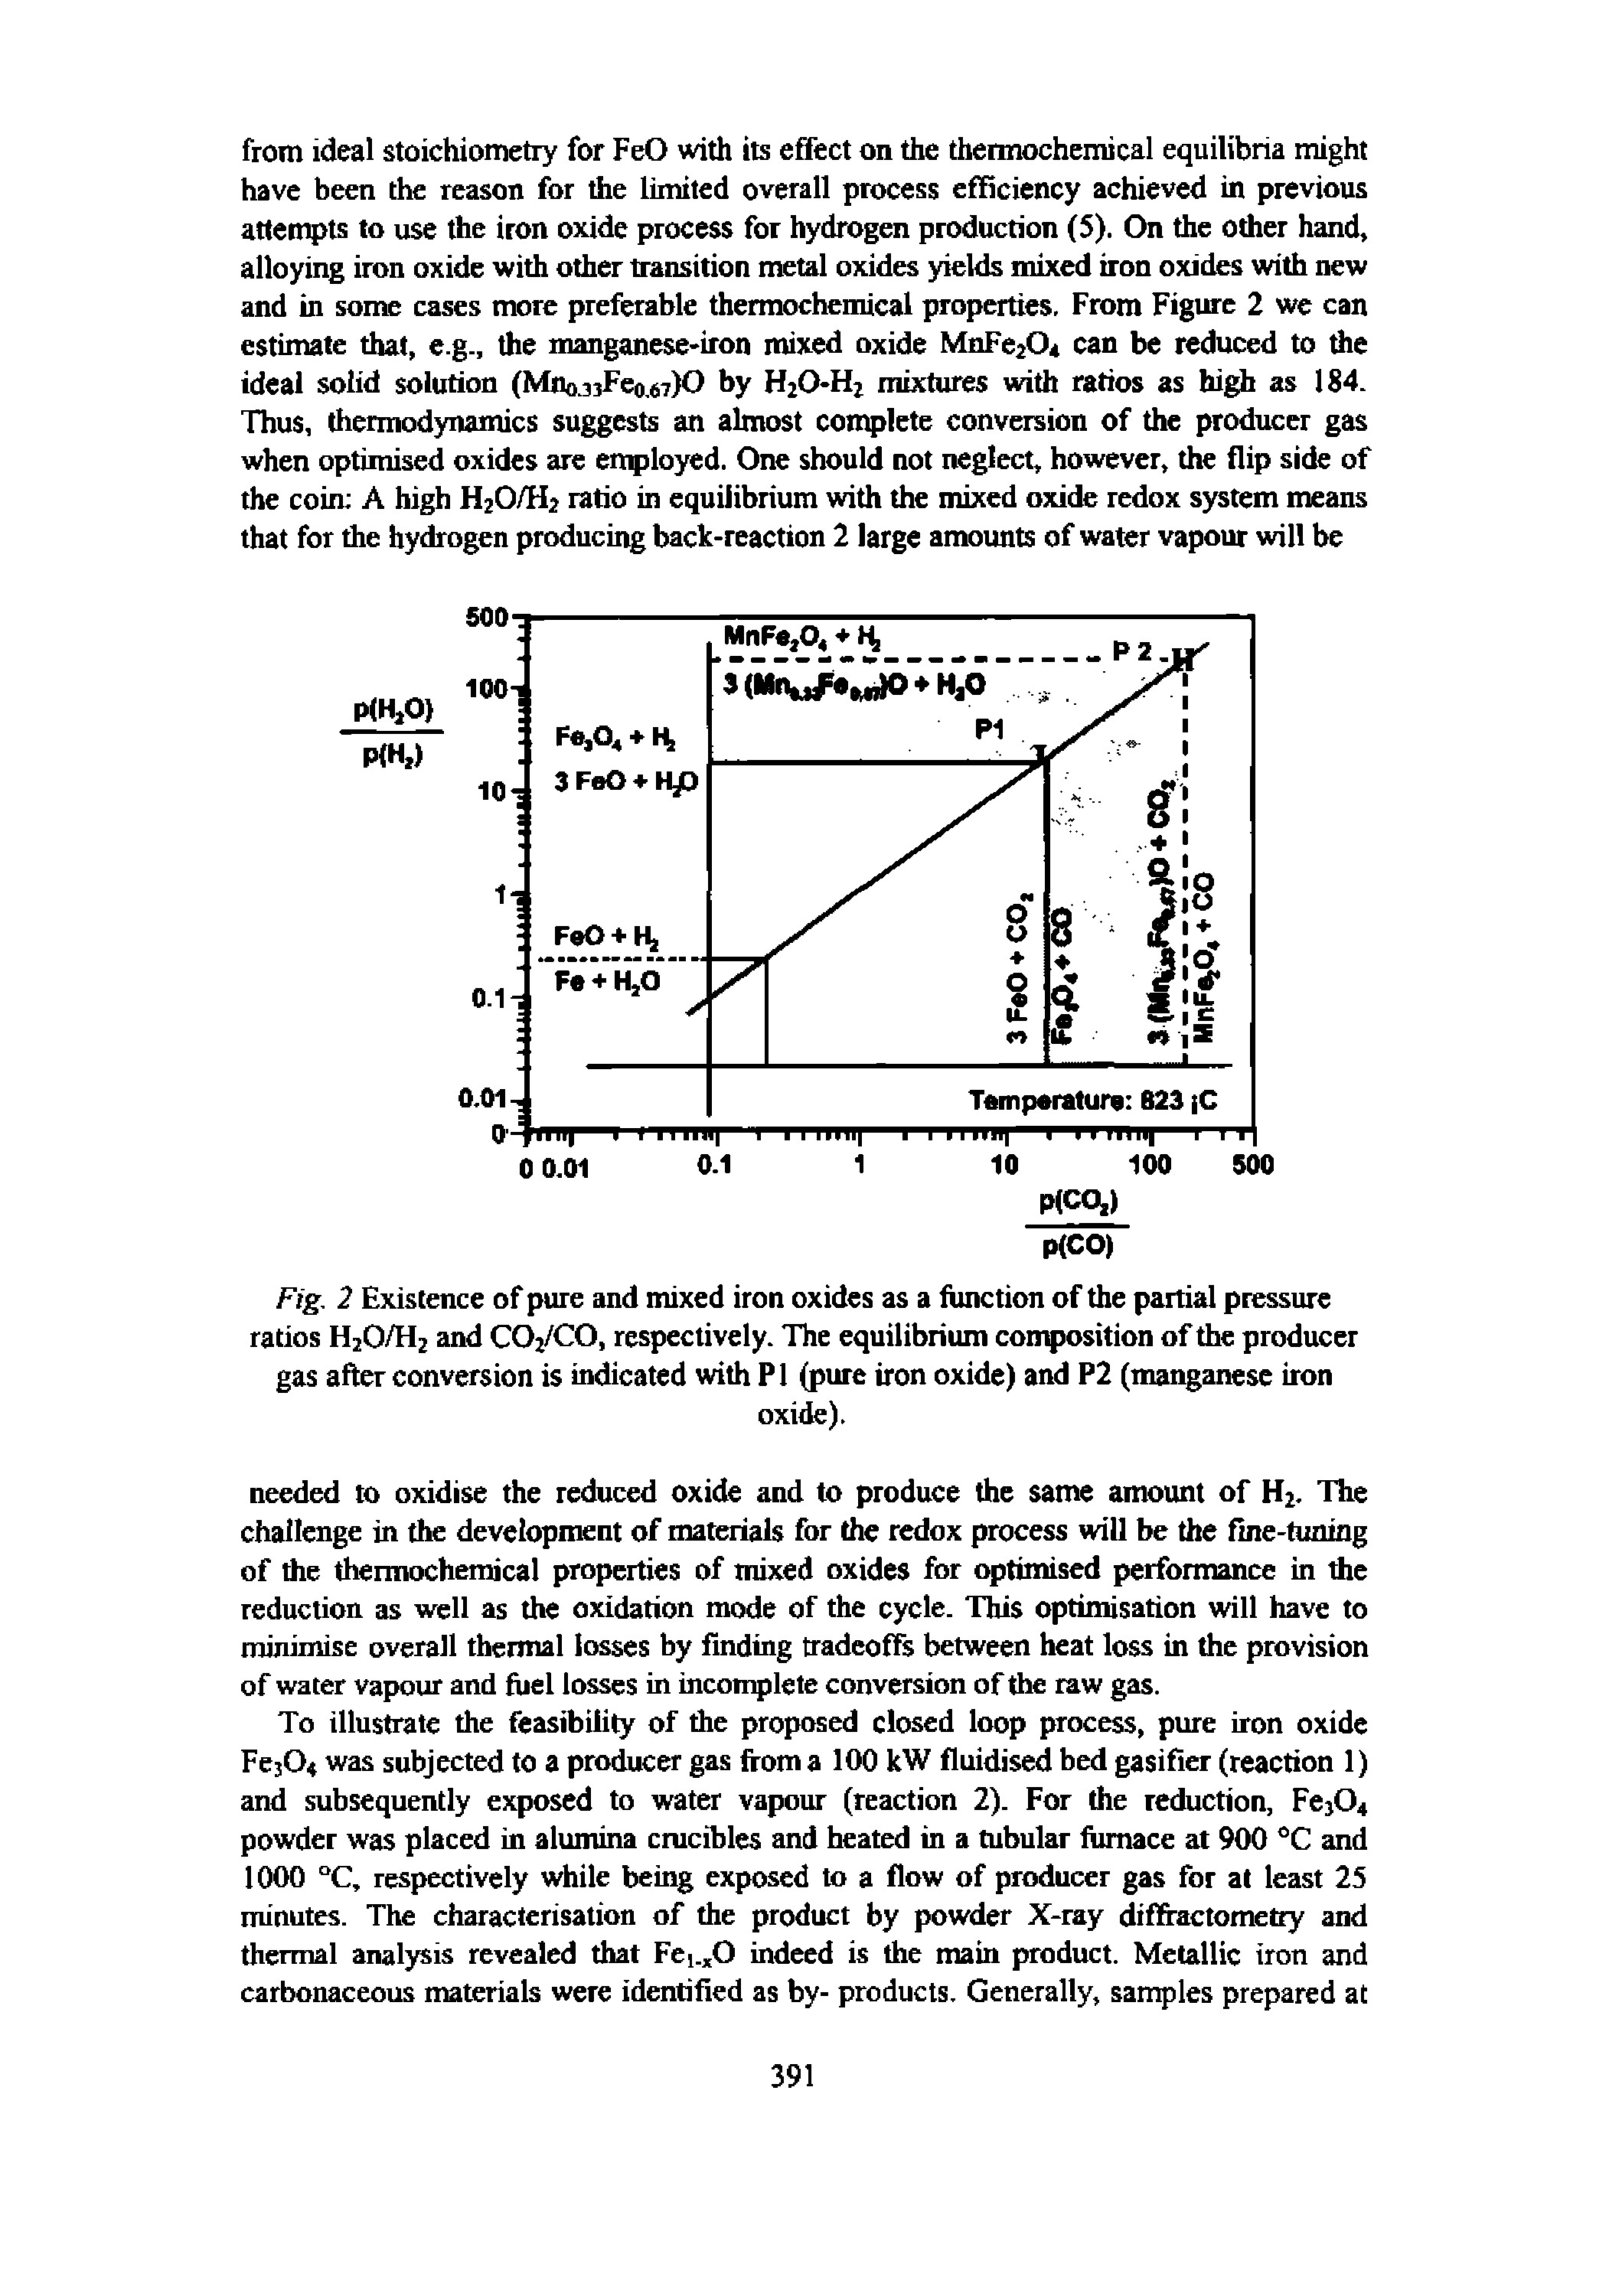 Fig. 2 Existence of pure and mixed iron oxides as a function of the partial pressure ratios H2O/H2 and C02/CO, respectively. The equilibrium con iosition of the producer gas after conversion is indicated with PI (pure iron oxide) and P2 (manganese iron...